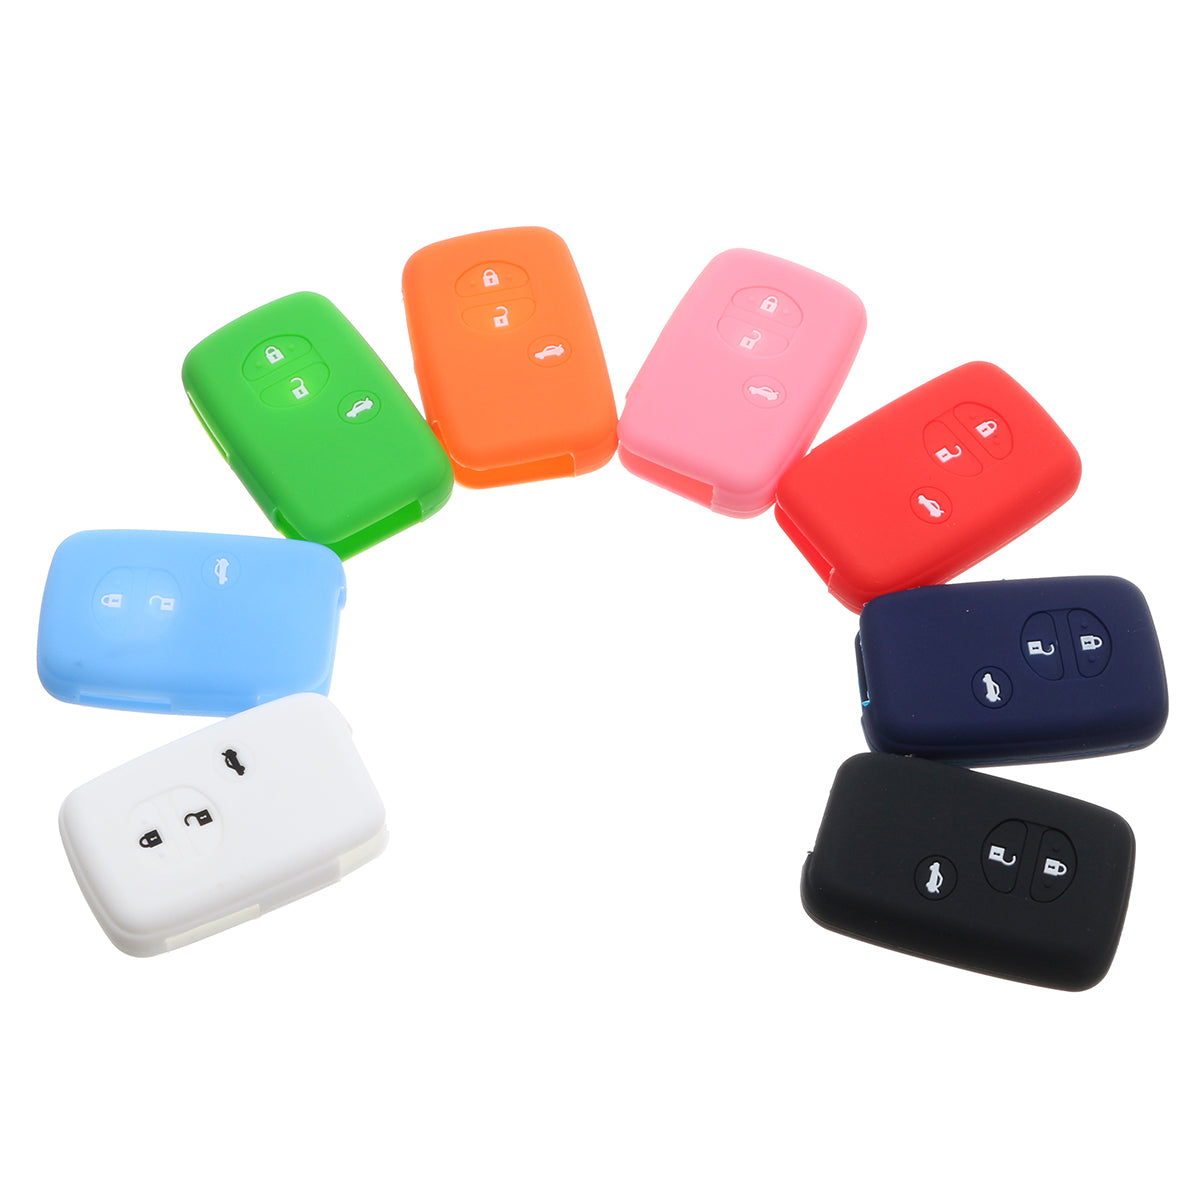 Coral 3 Buttons Silicone Fob Remote Key Case Cover Fit For Toyota Prado Crown Reiz